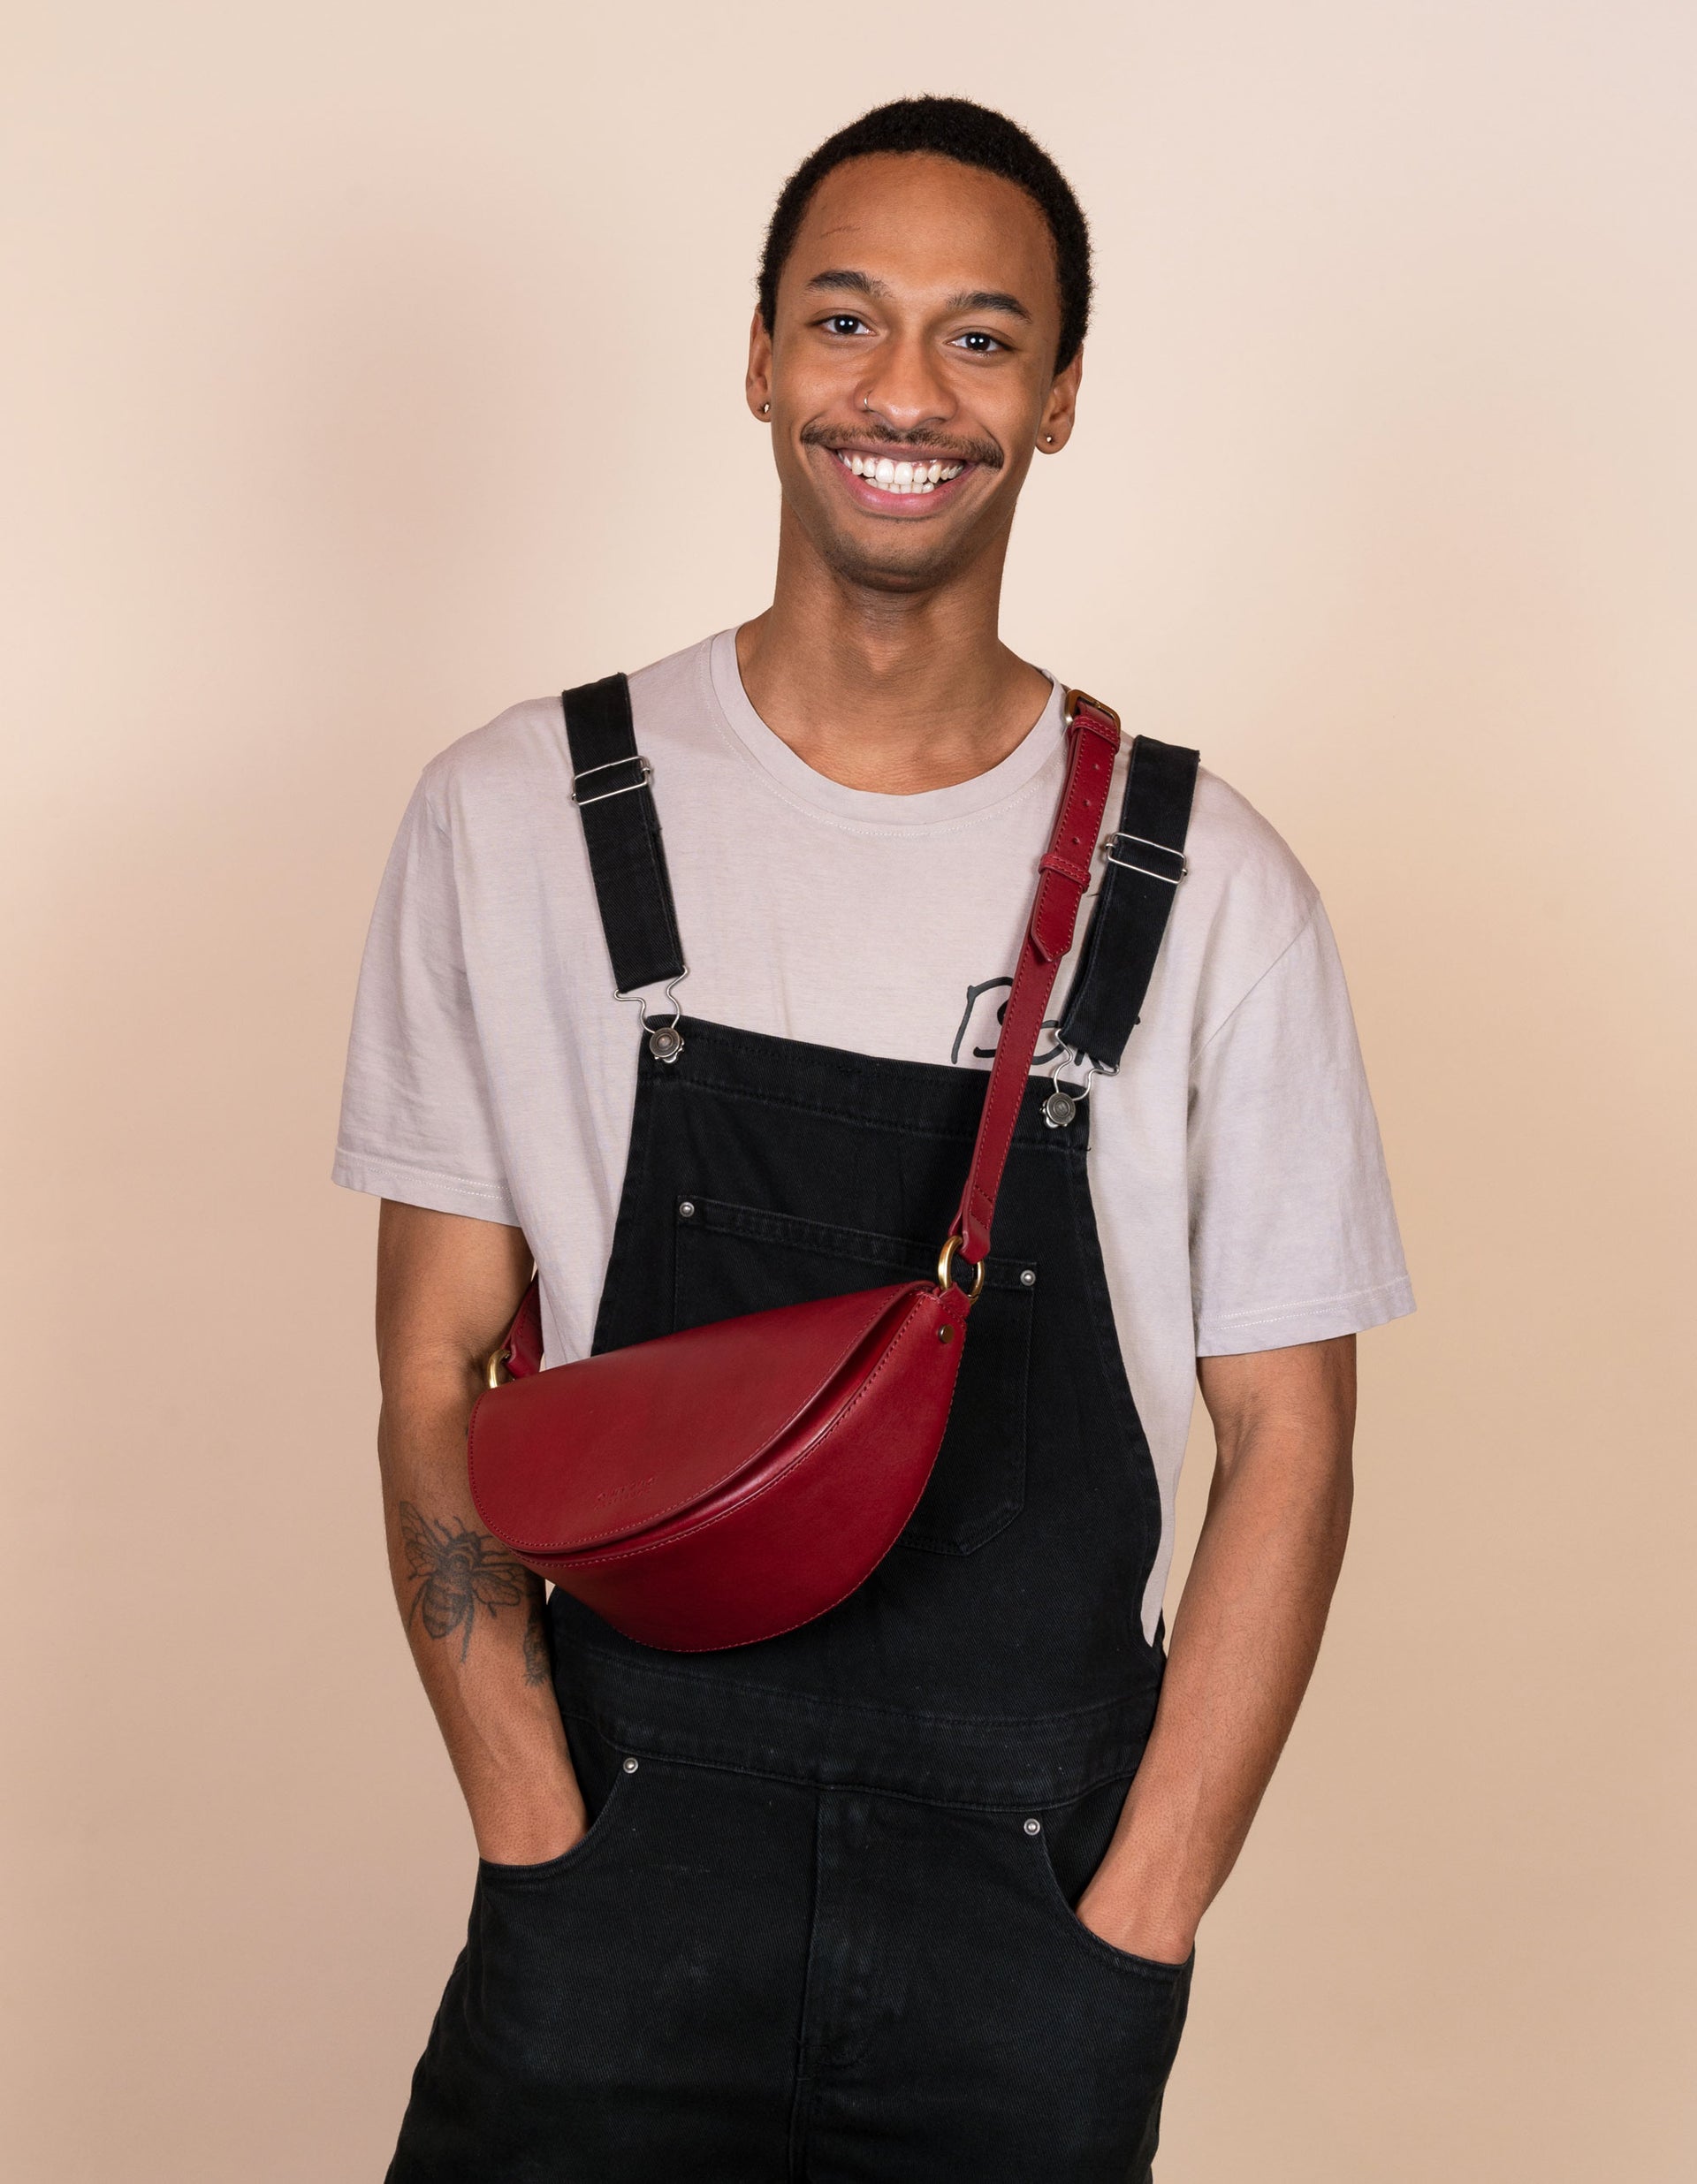 Laura Bag in Ruby Classic Leather ft. Adjustable leather strap - Male model product image